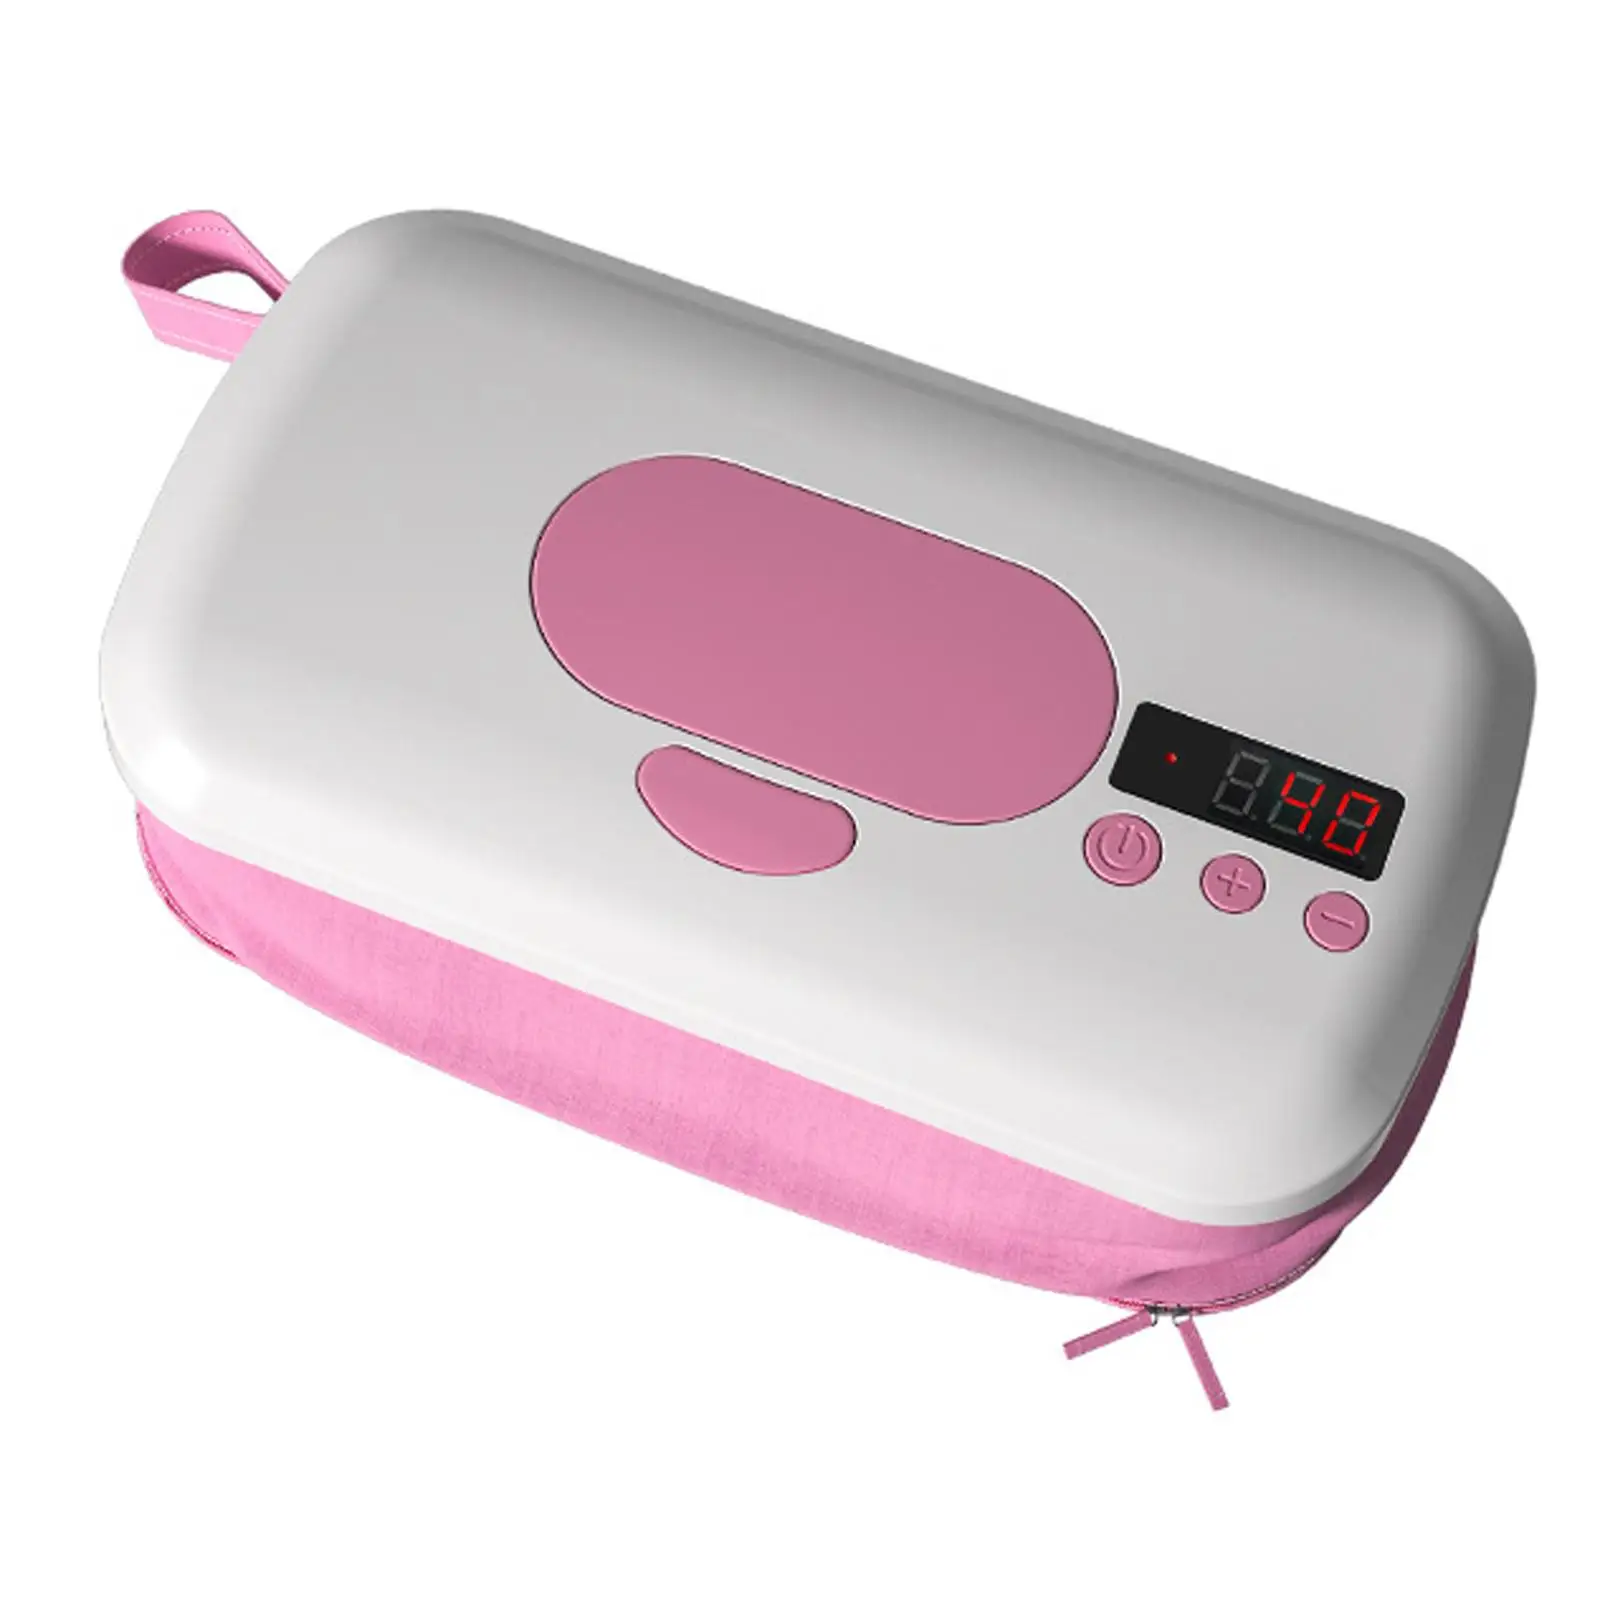 Wipes Warmer Wet Tissue Dispenser Folding Wipe Container Adjustable Temperature LED Display High Capacity Wipe Heater for Travel